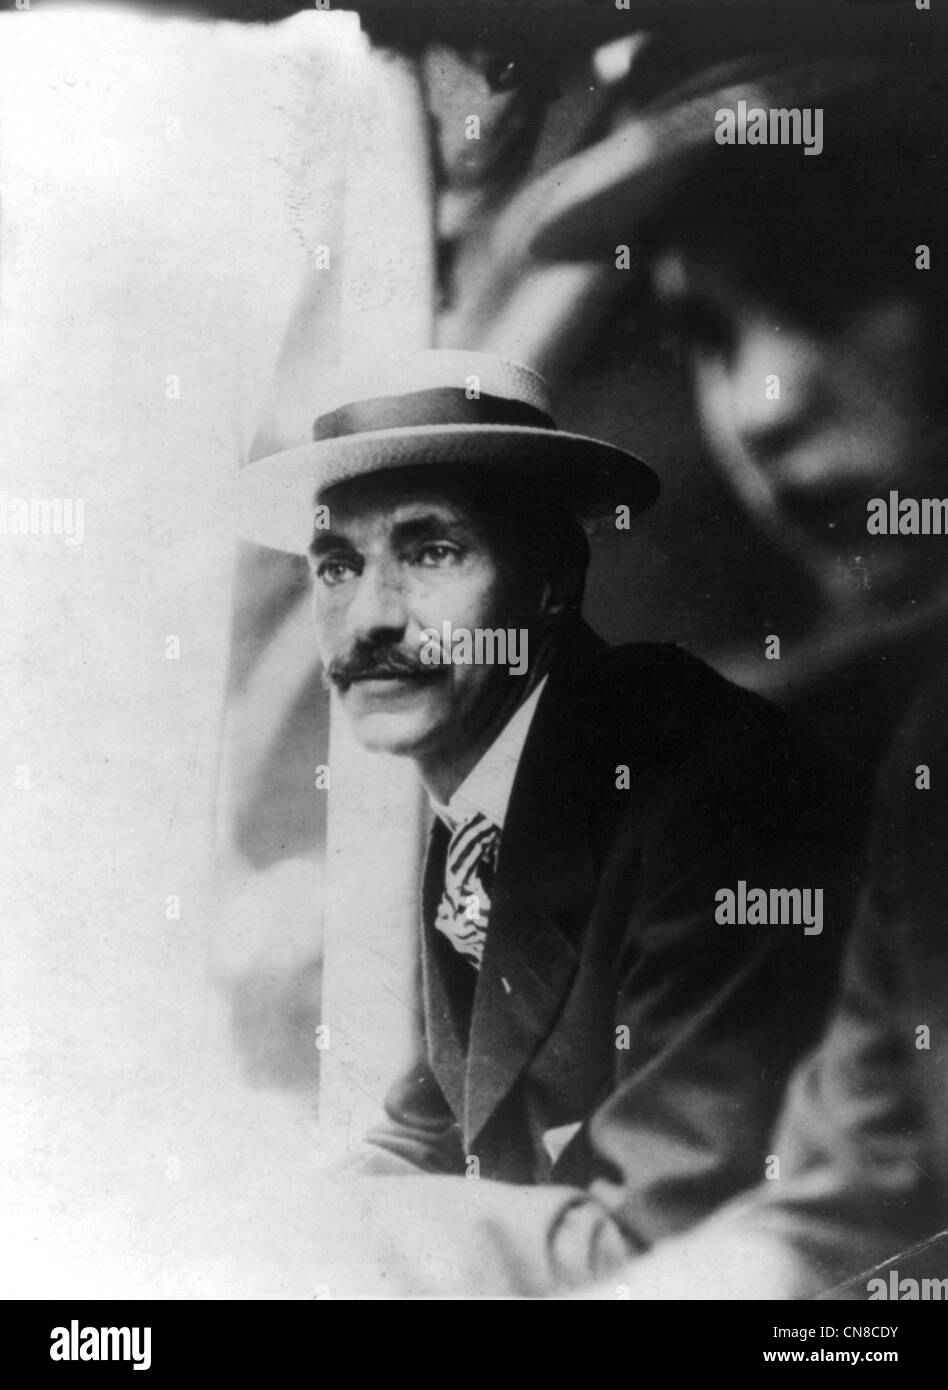 John Jacob Astor IV, he was the richest passenger aboard the Titanic and did not survive. Stock Photo